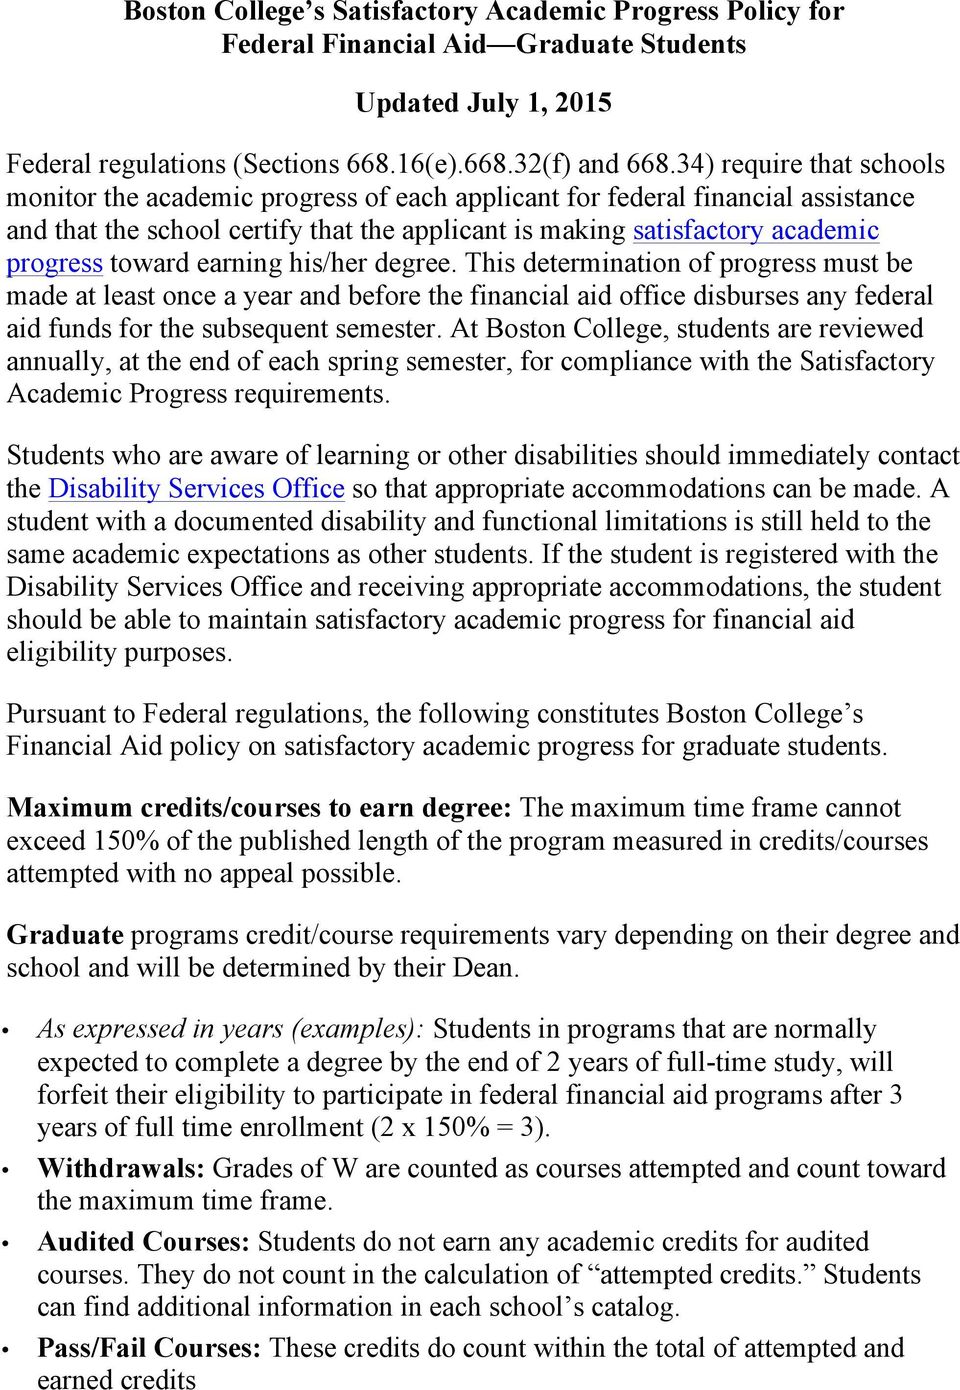 toward earning his/her degree. This determination of progress must be made at least once a year and before the financial aid office disburses any federal aid funds for the subsequent semester.